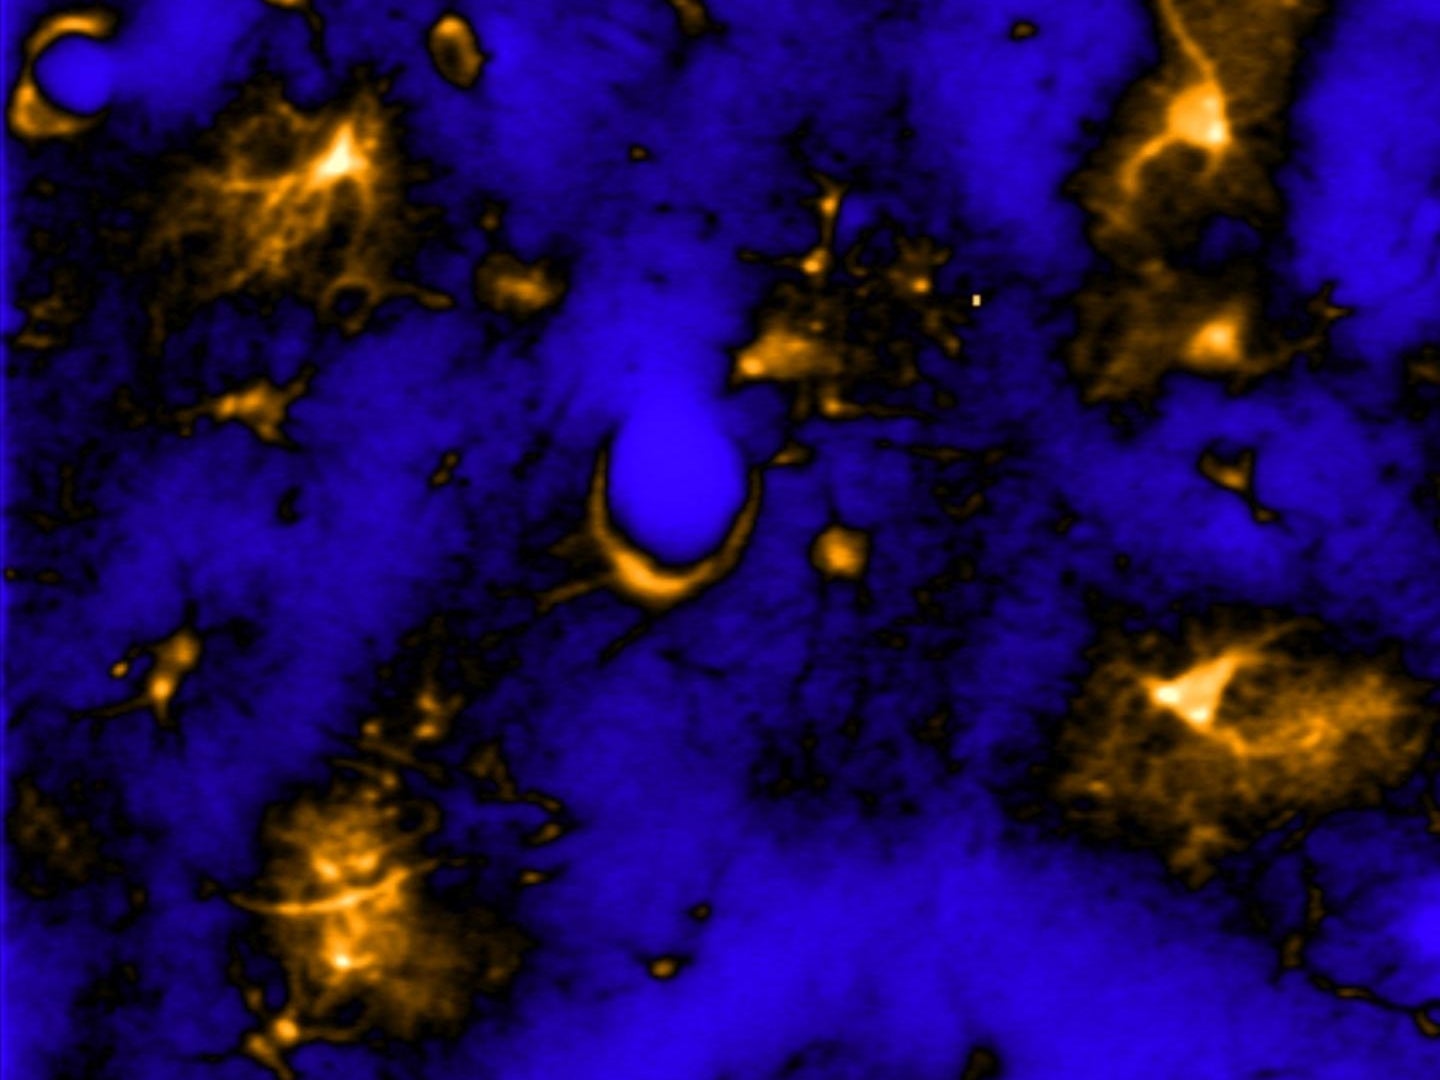 Astrocytes in the brain expressing a fluorescent calcium indicator captured with a two-photon microscope.